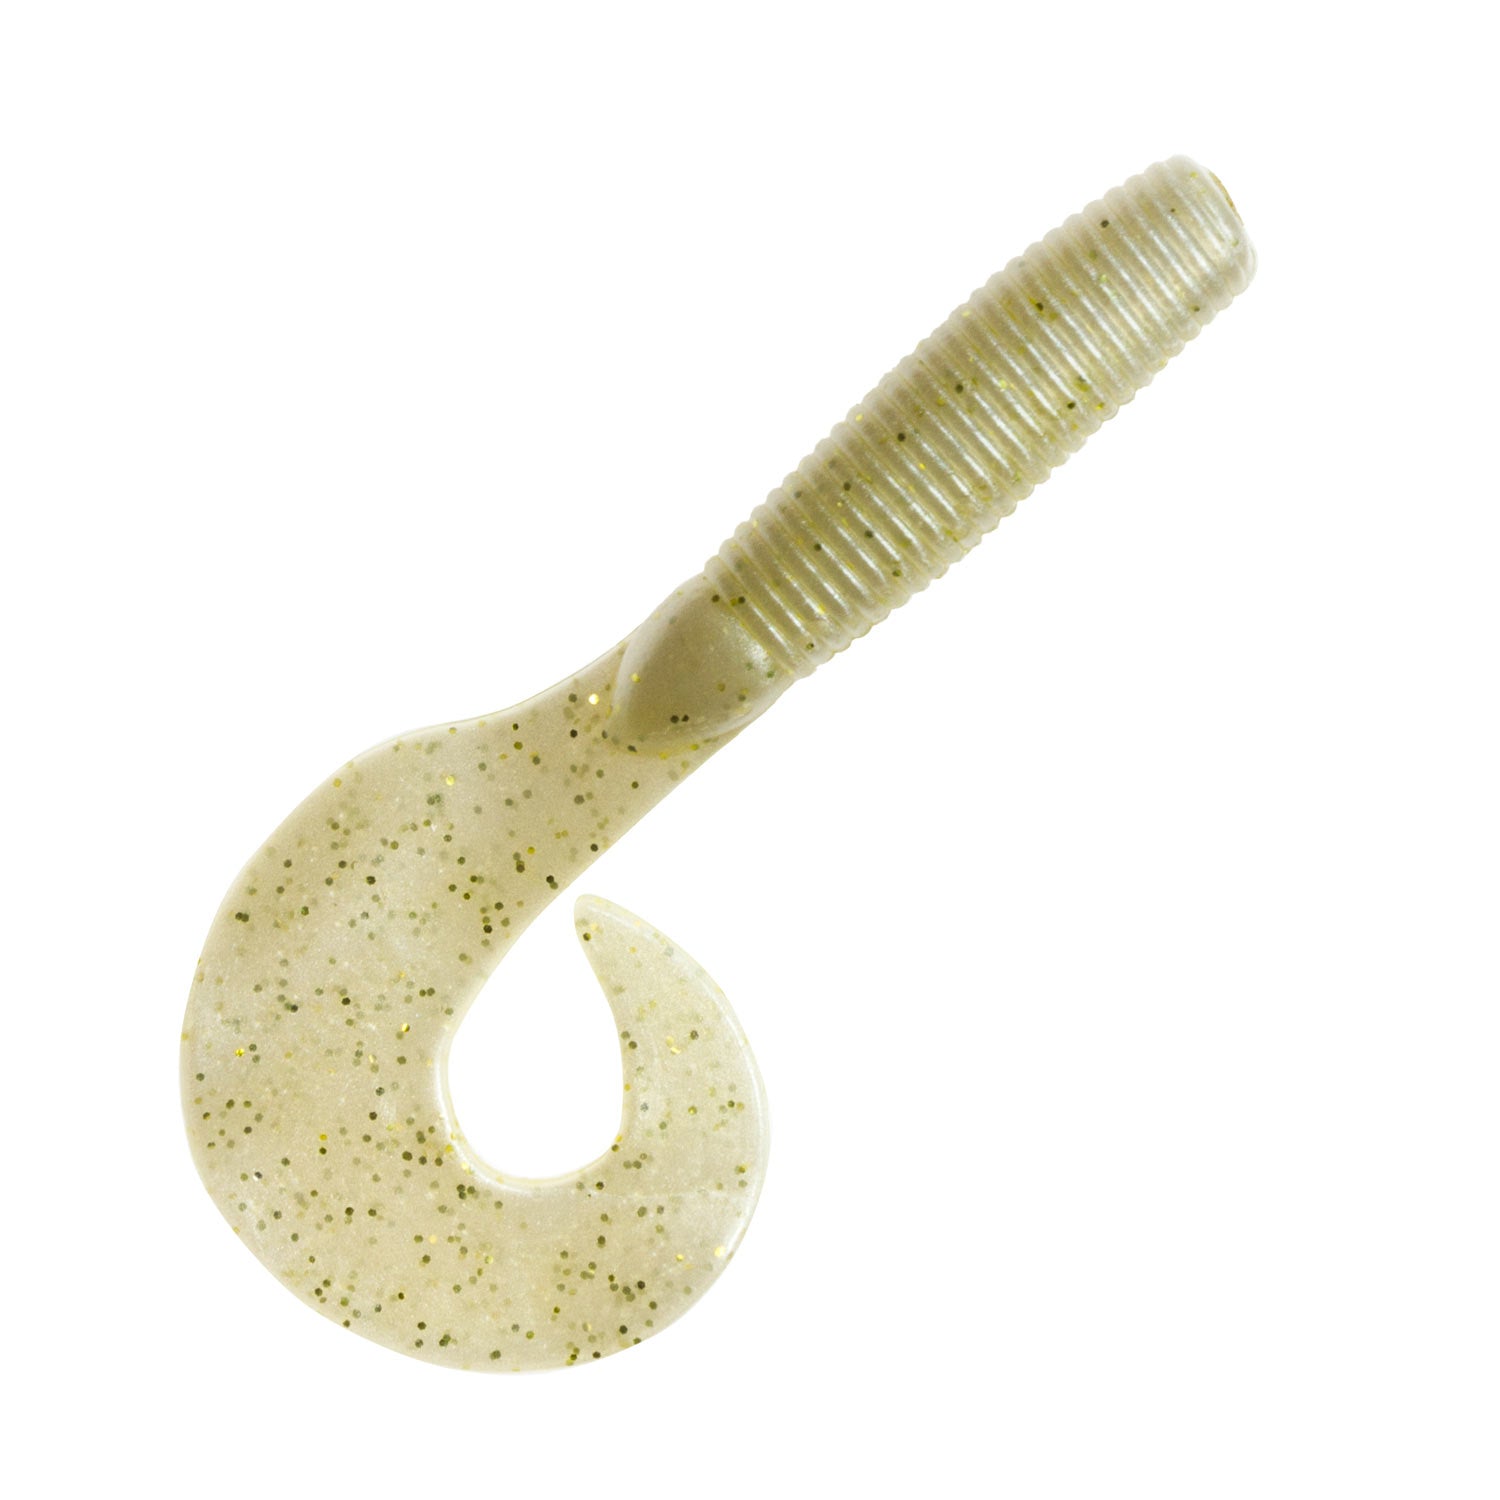 5 Curly-Tail Grub (10 Pack) - Gold Shad